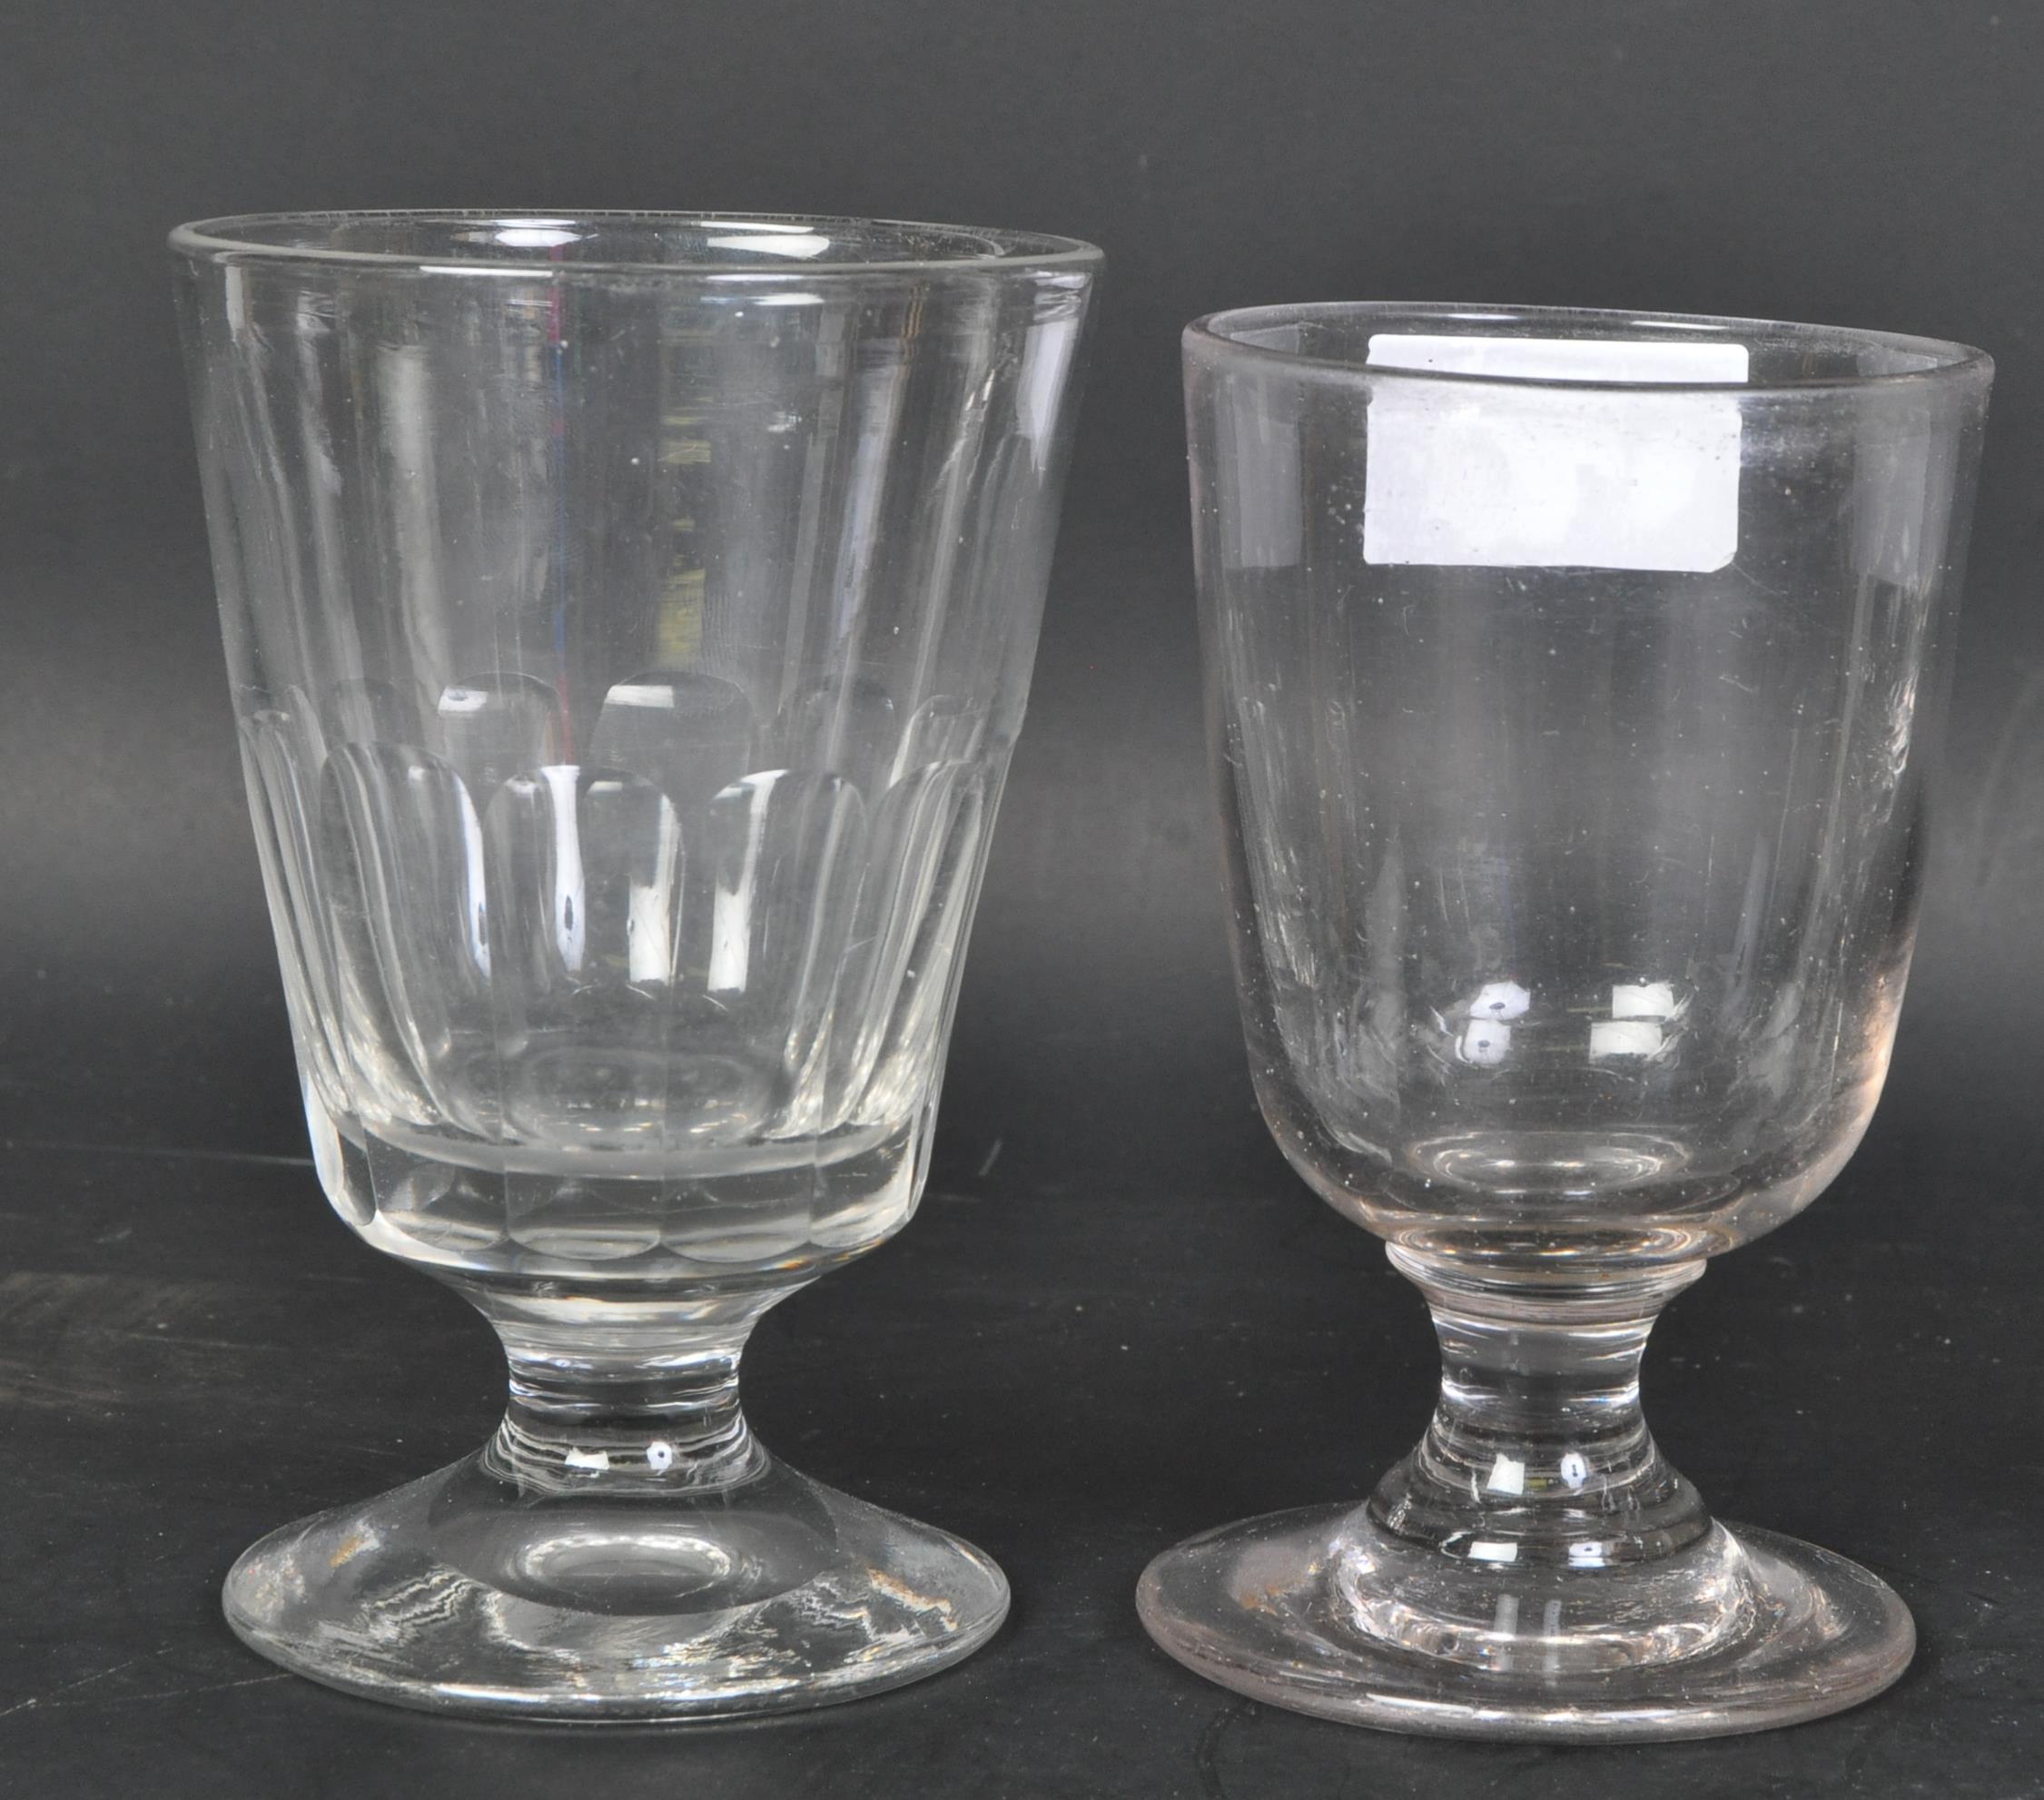 FOUR 19TH CENTURY GLASS RUMMER DRINKING GLASSES - Image 2 of 4